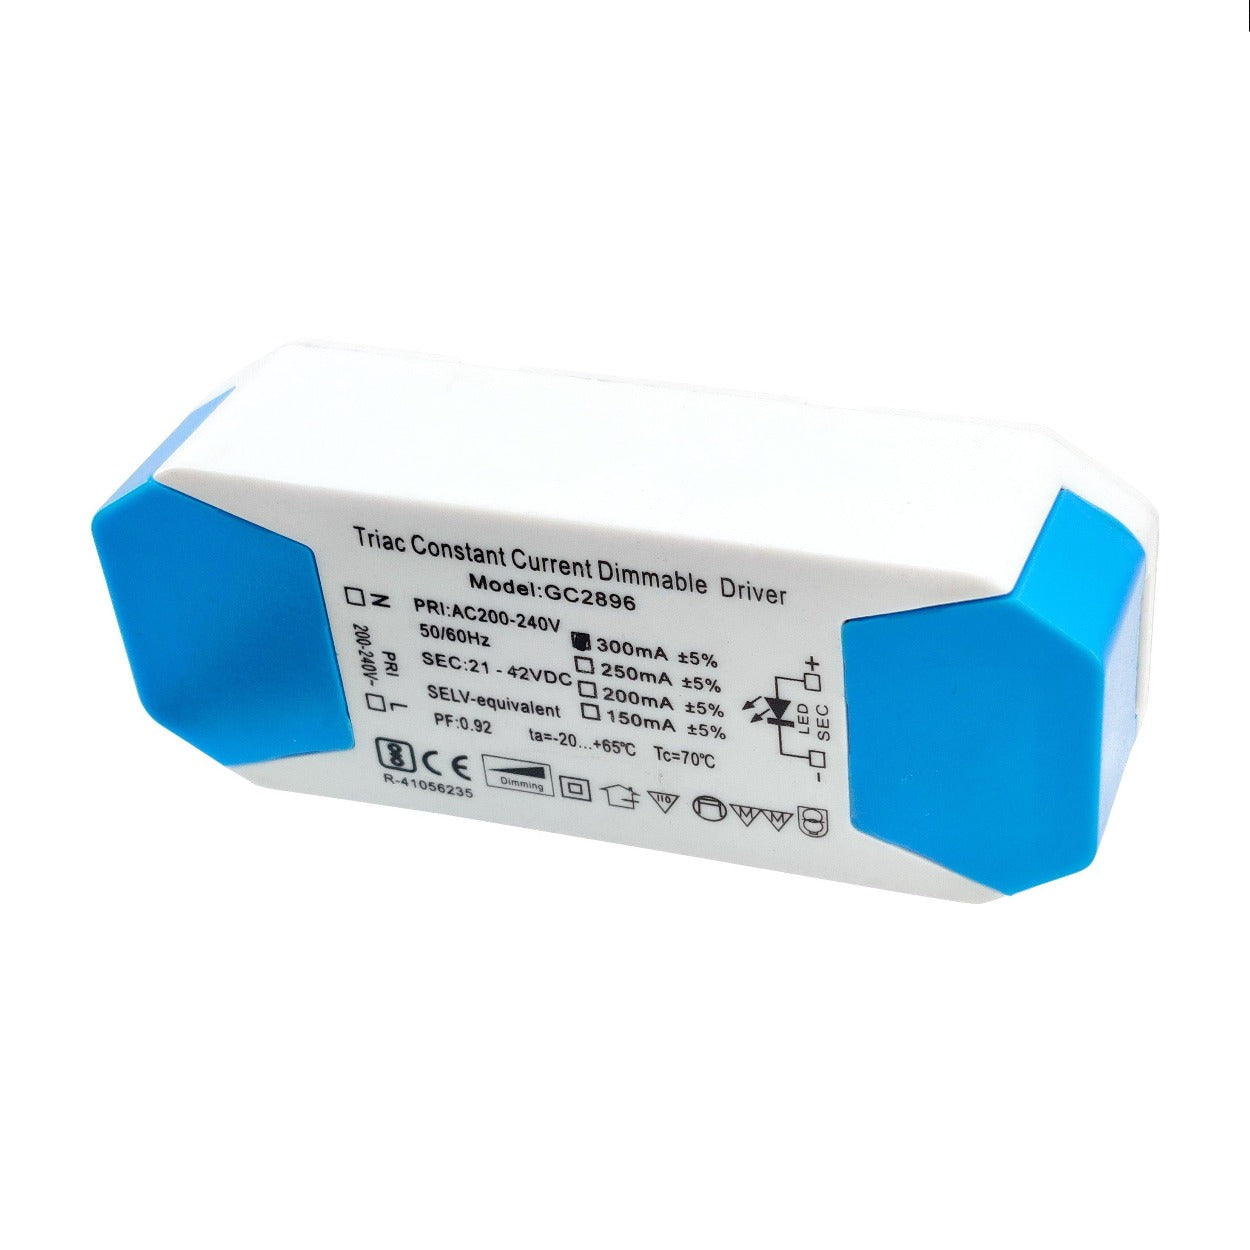 ANKUR PHASE CUT / TRIAC CONSTANT CURRENT DIMMABLE LED DRIVER - Ankur Lighting